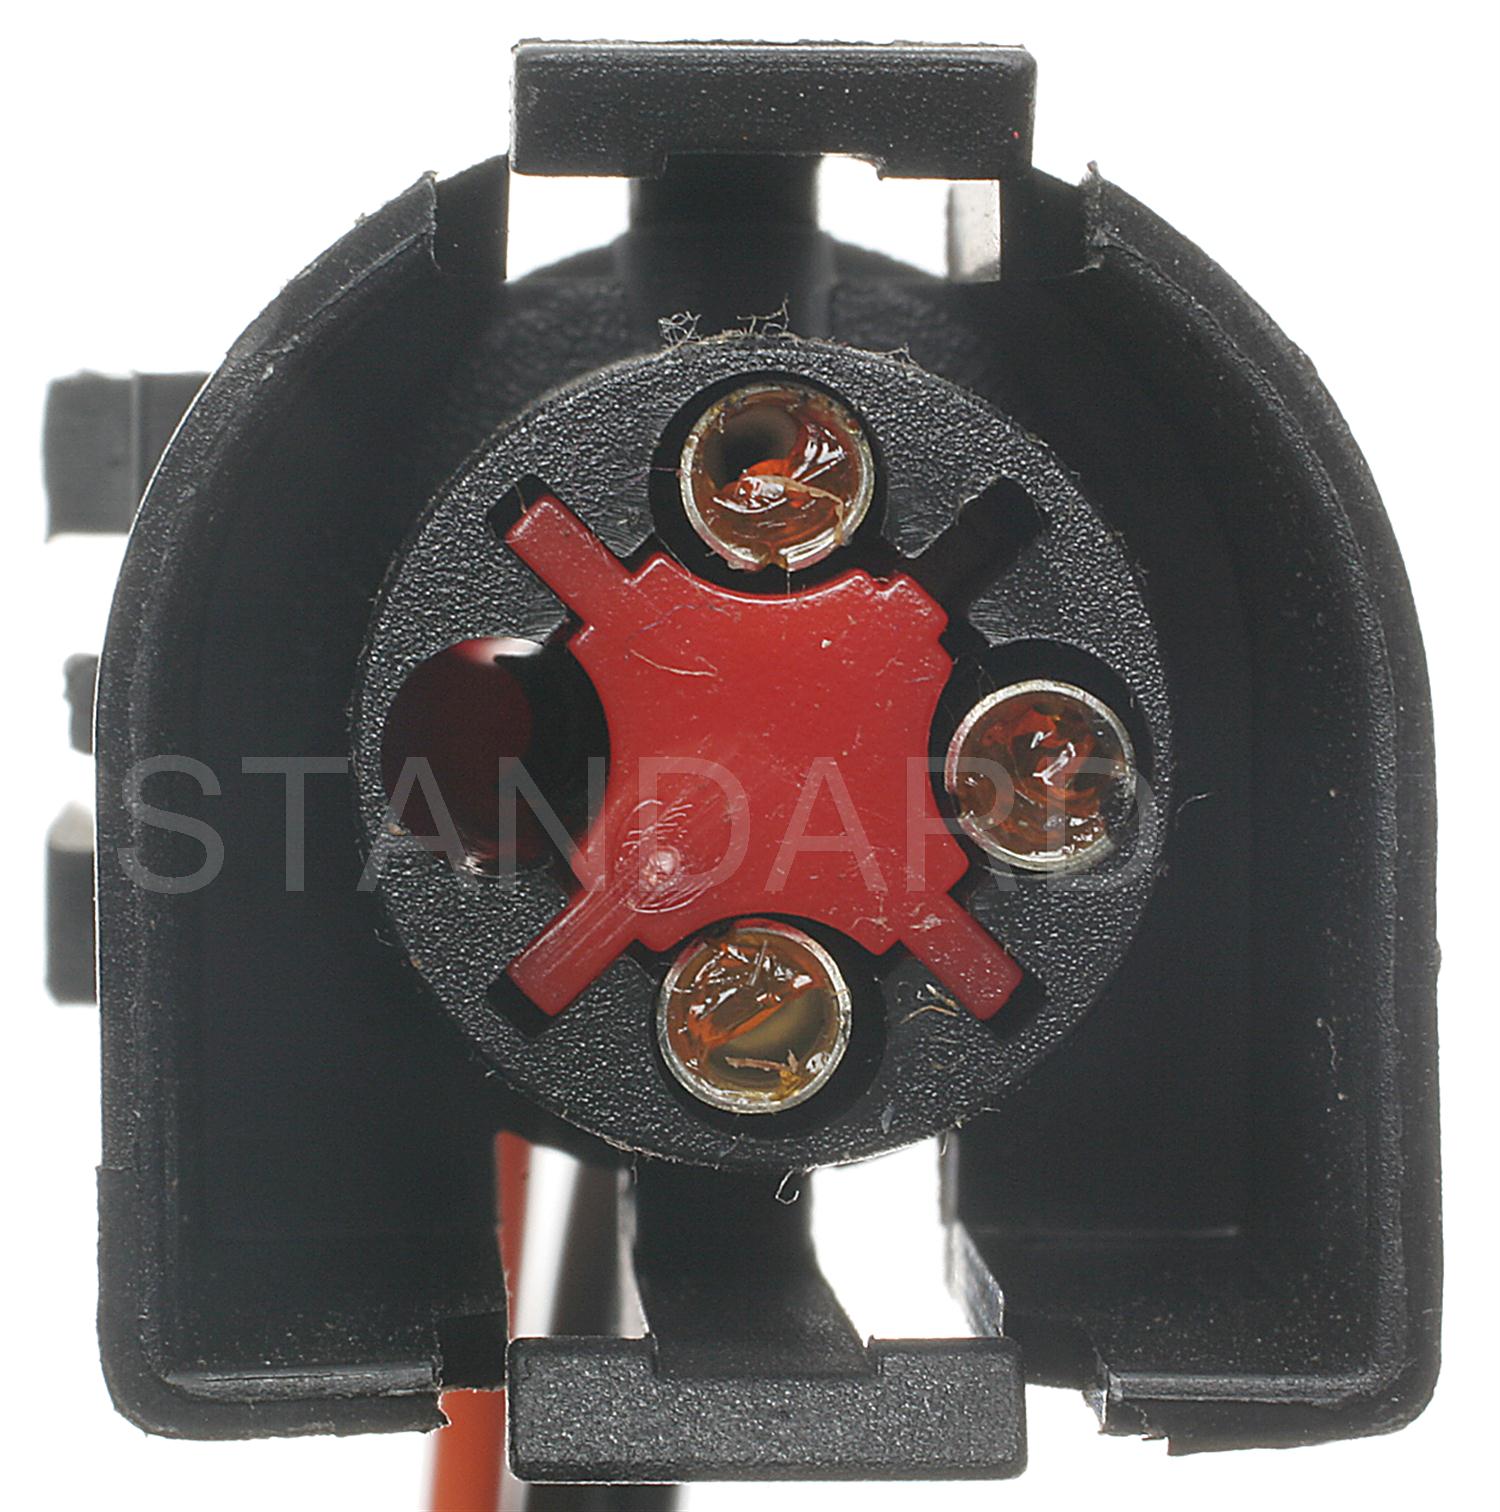 Picture of Standard Motor Products S785 Egr Sensor Connector